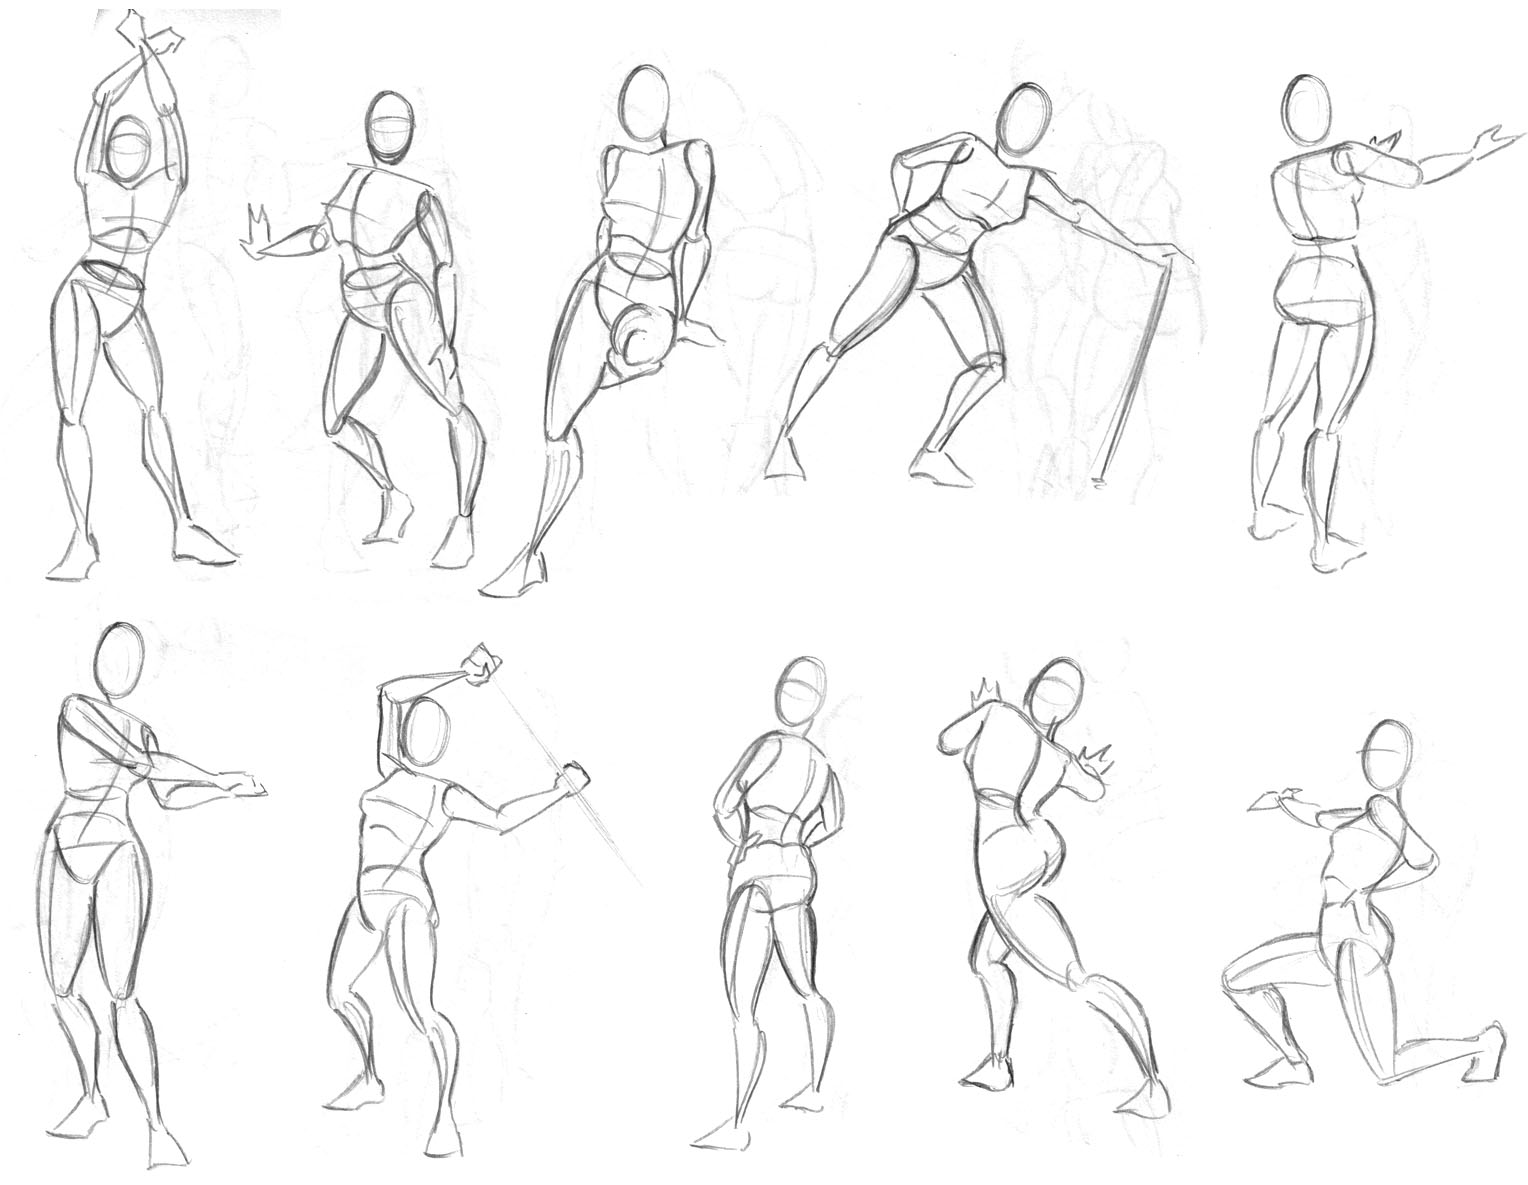 How To Draw Human Figures In Different Positions